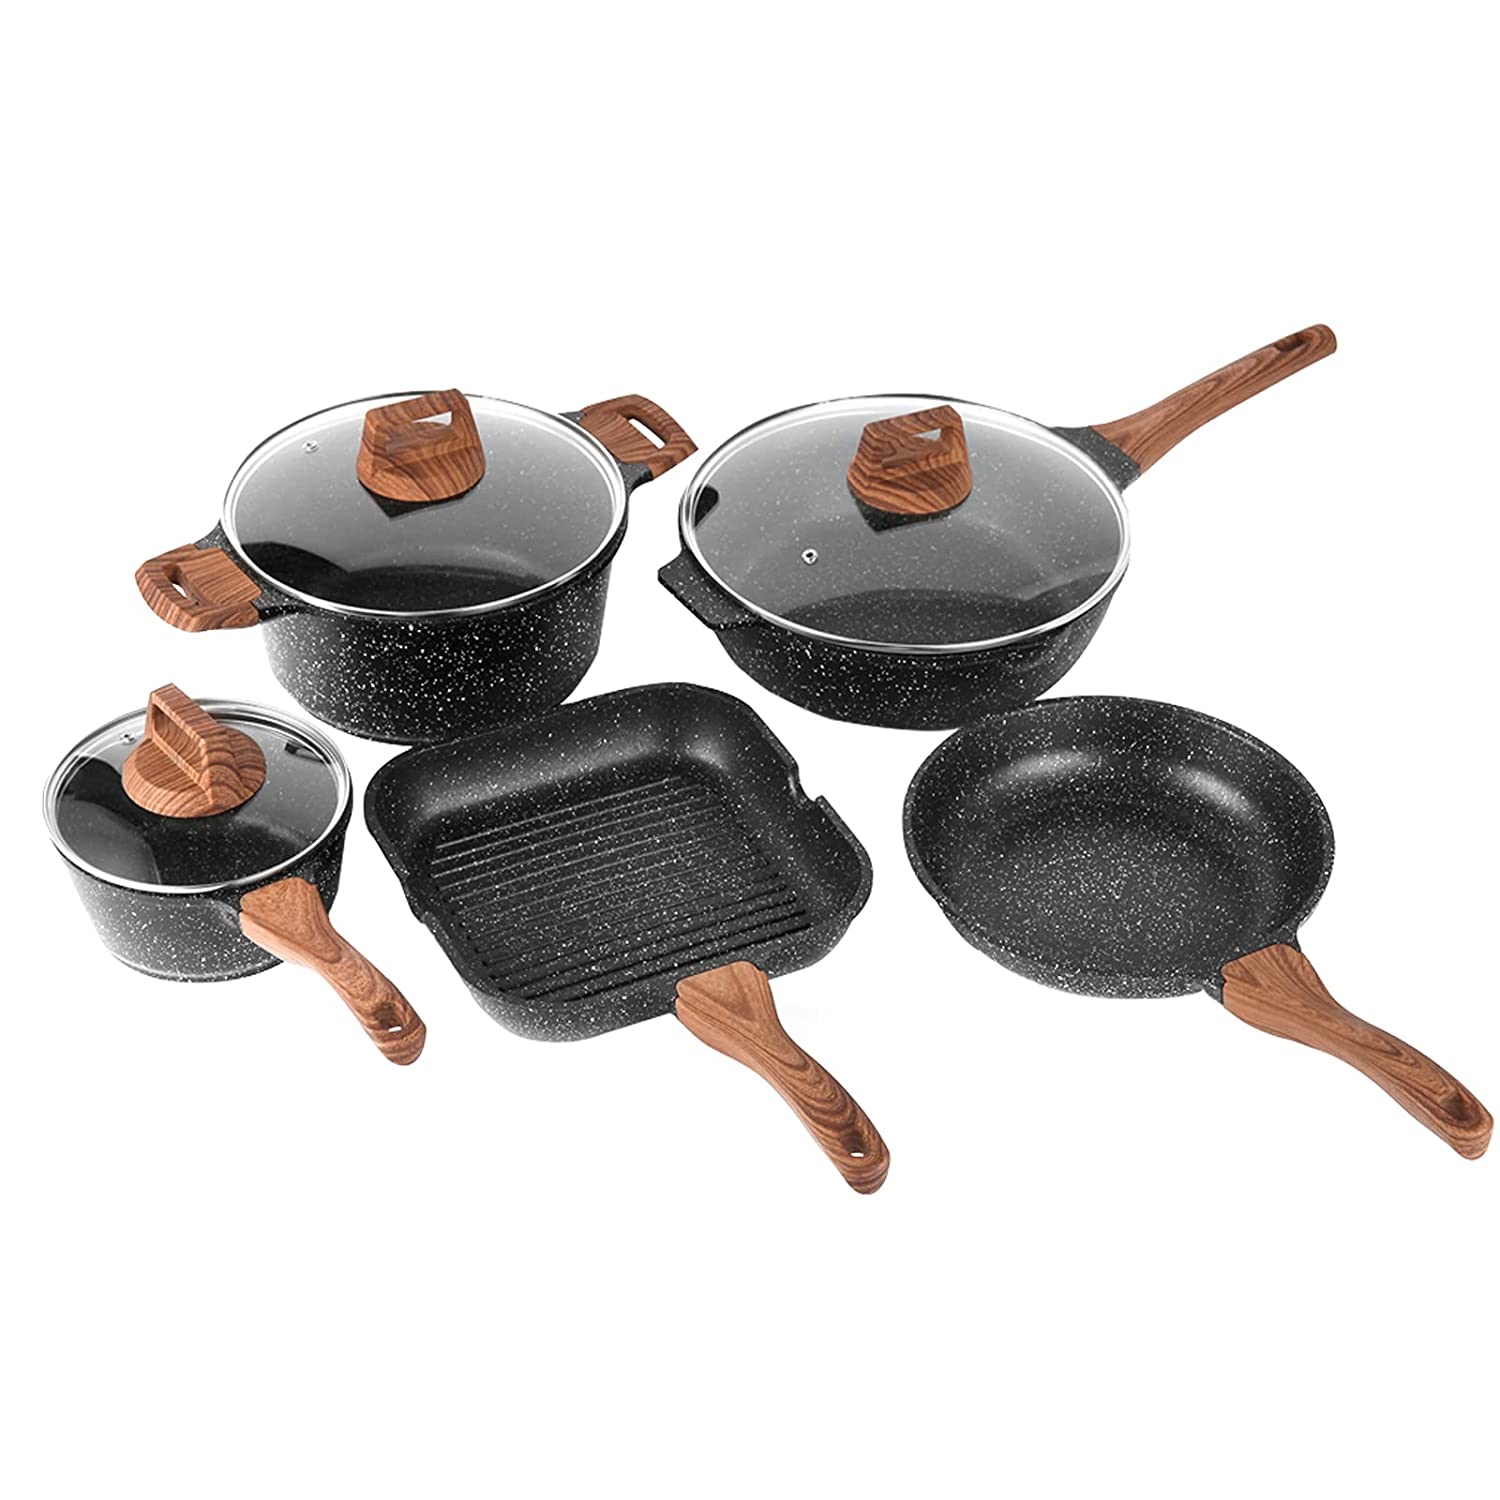 MICHELANGELO Pots and Pans Set 15 Piece, Ultra Nonstick Kitchen Cookware  Sets with Stone-Derived Coating, Stone Cookware Set with Untinsle Set &  Stone